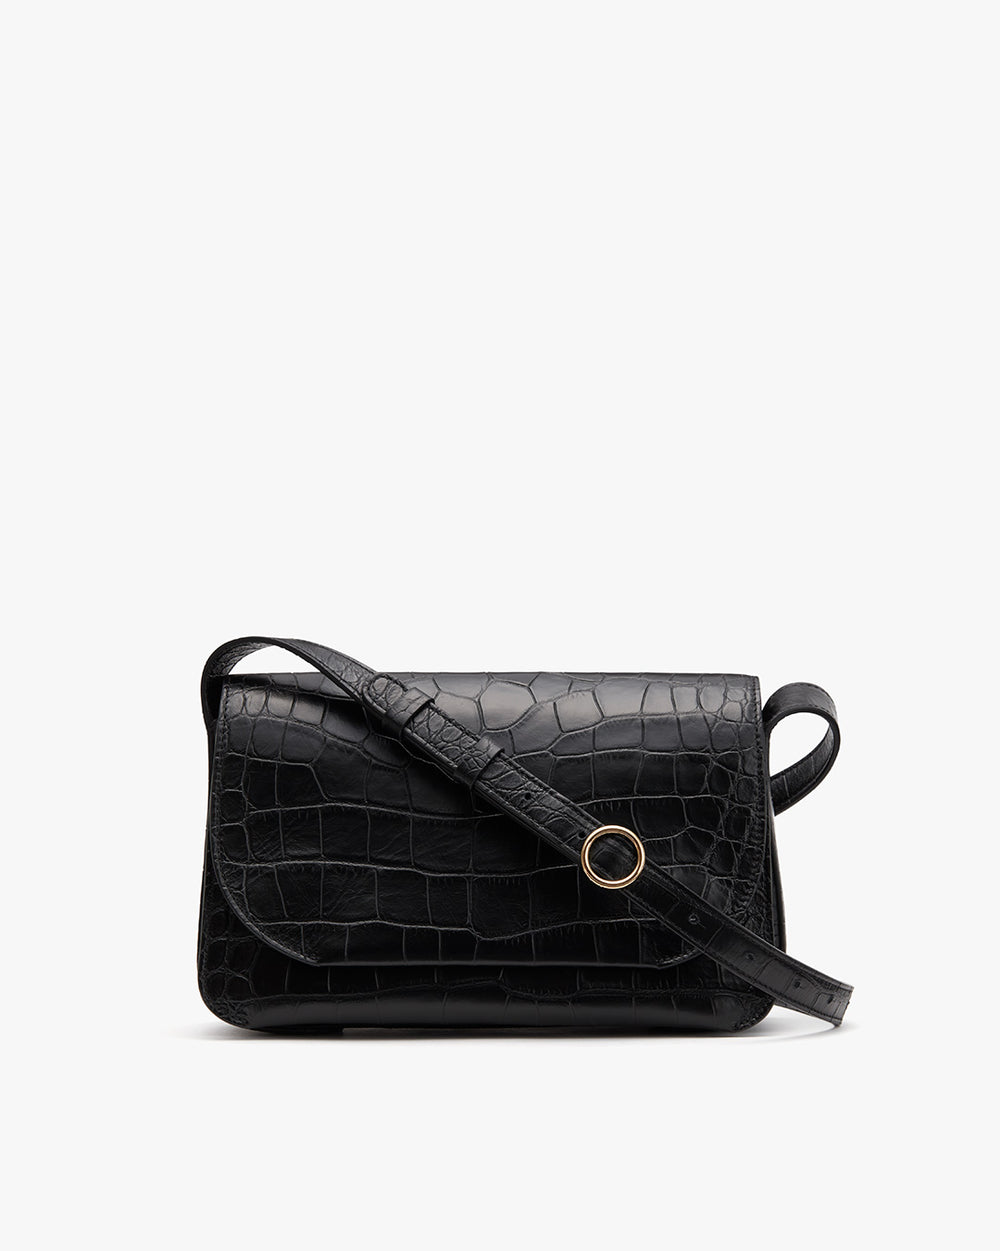 Small shoulder bag with a textured surface and round clasp.